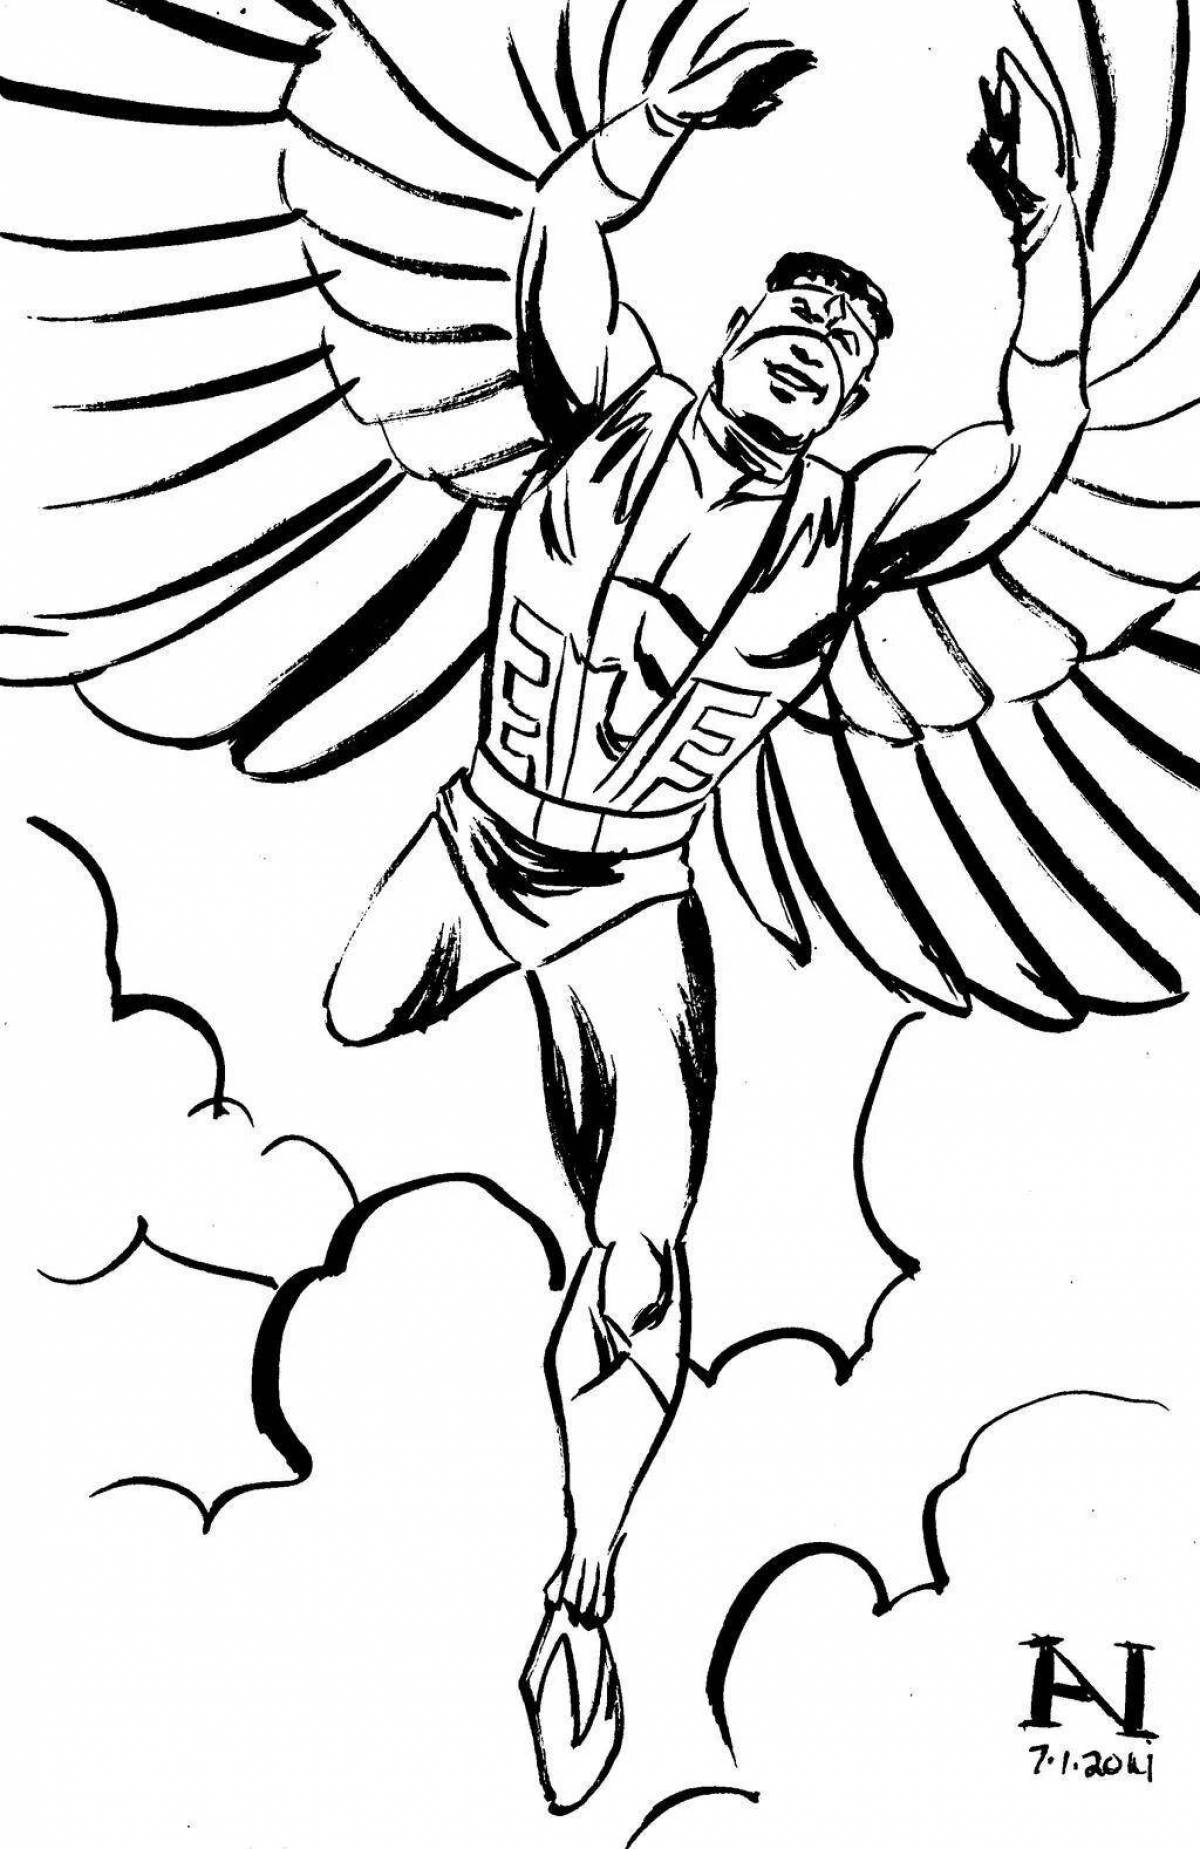 Colorful marvel falcon coloring page